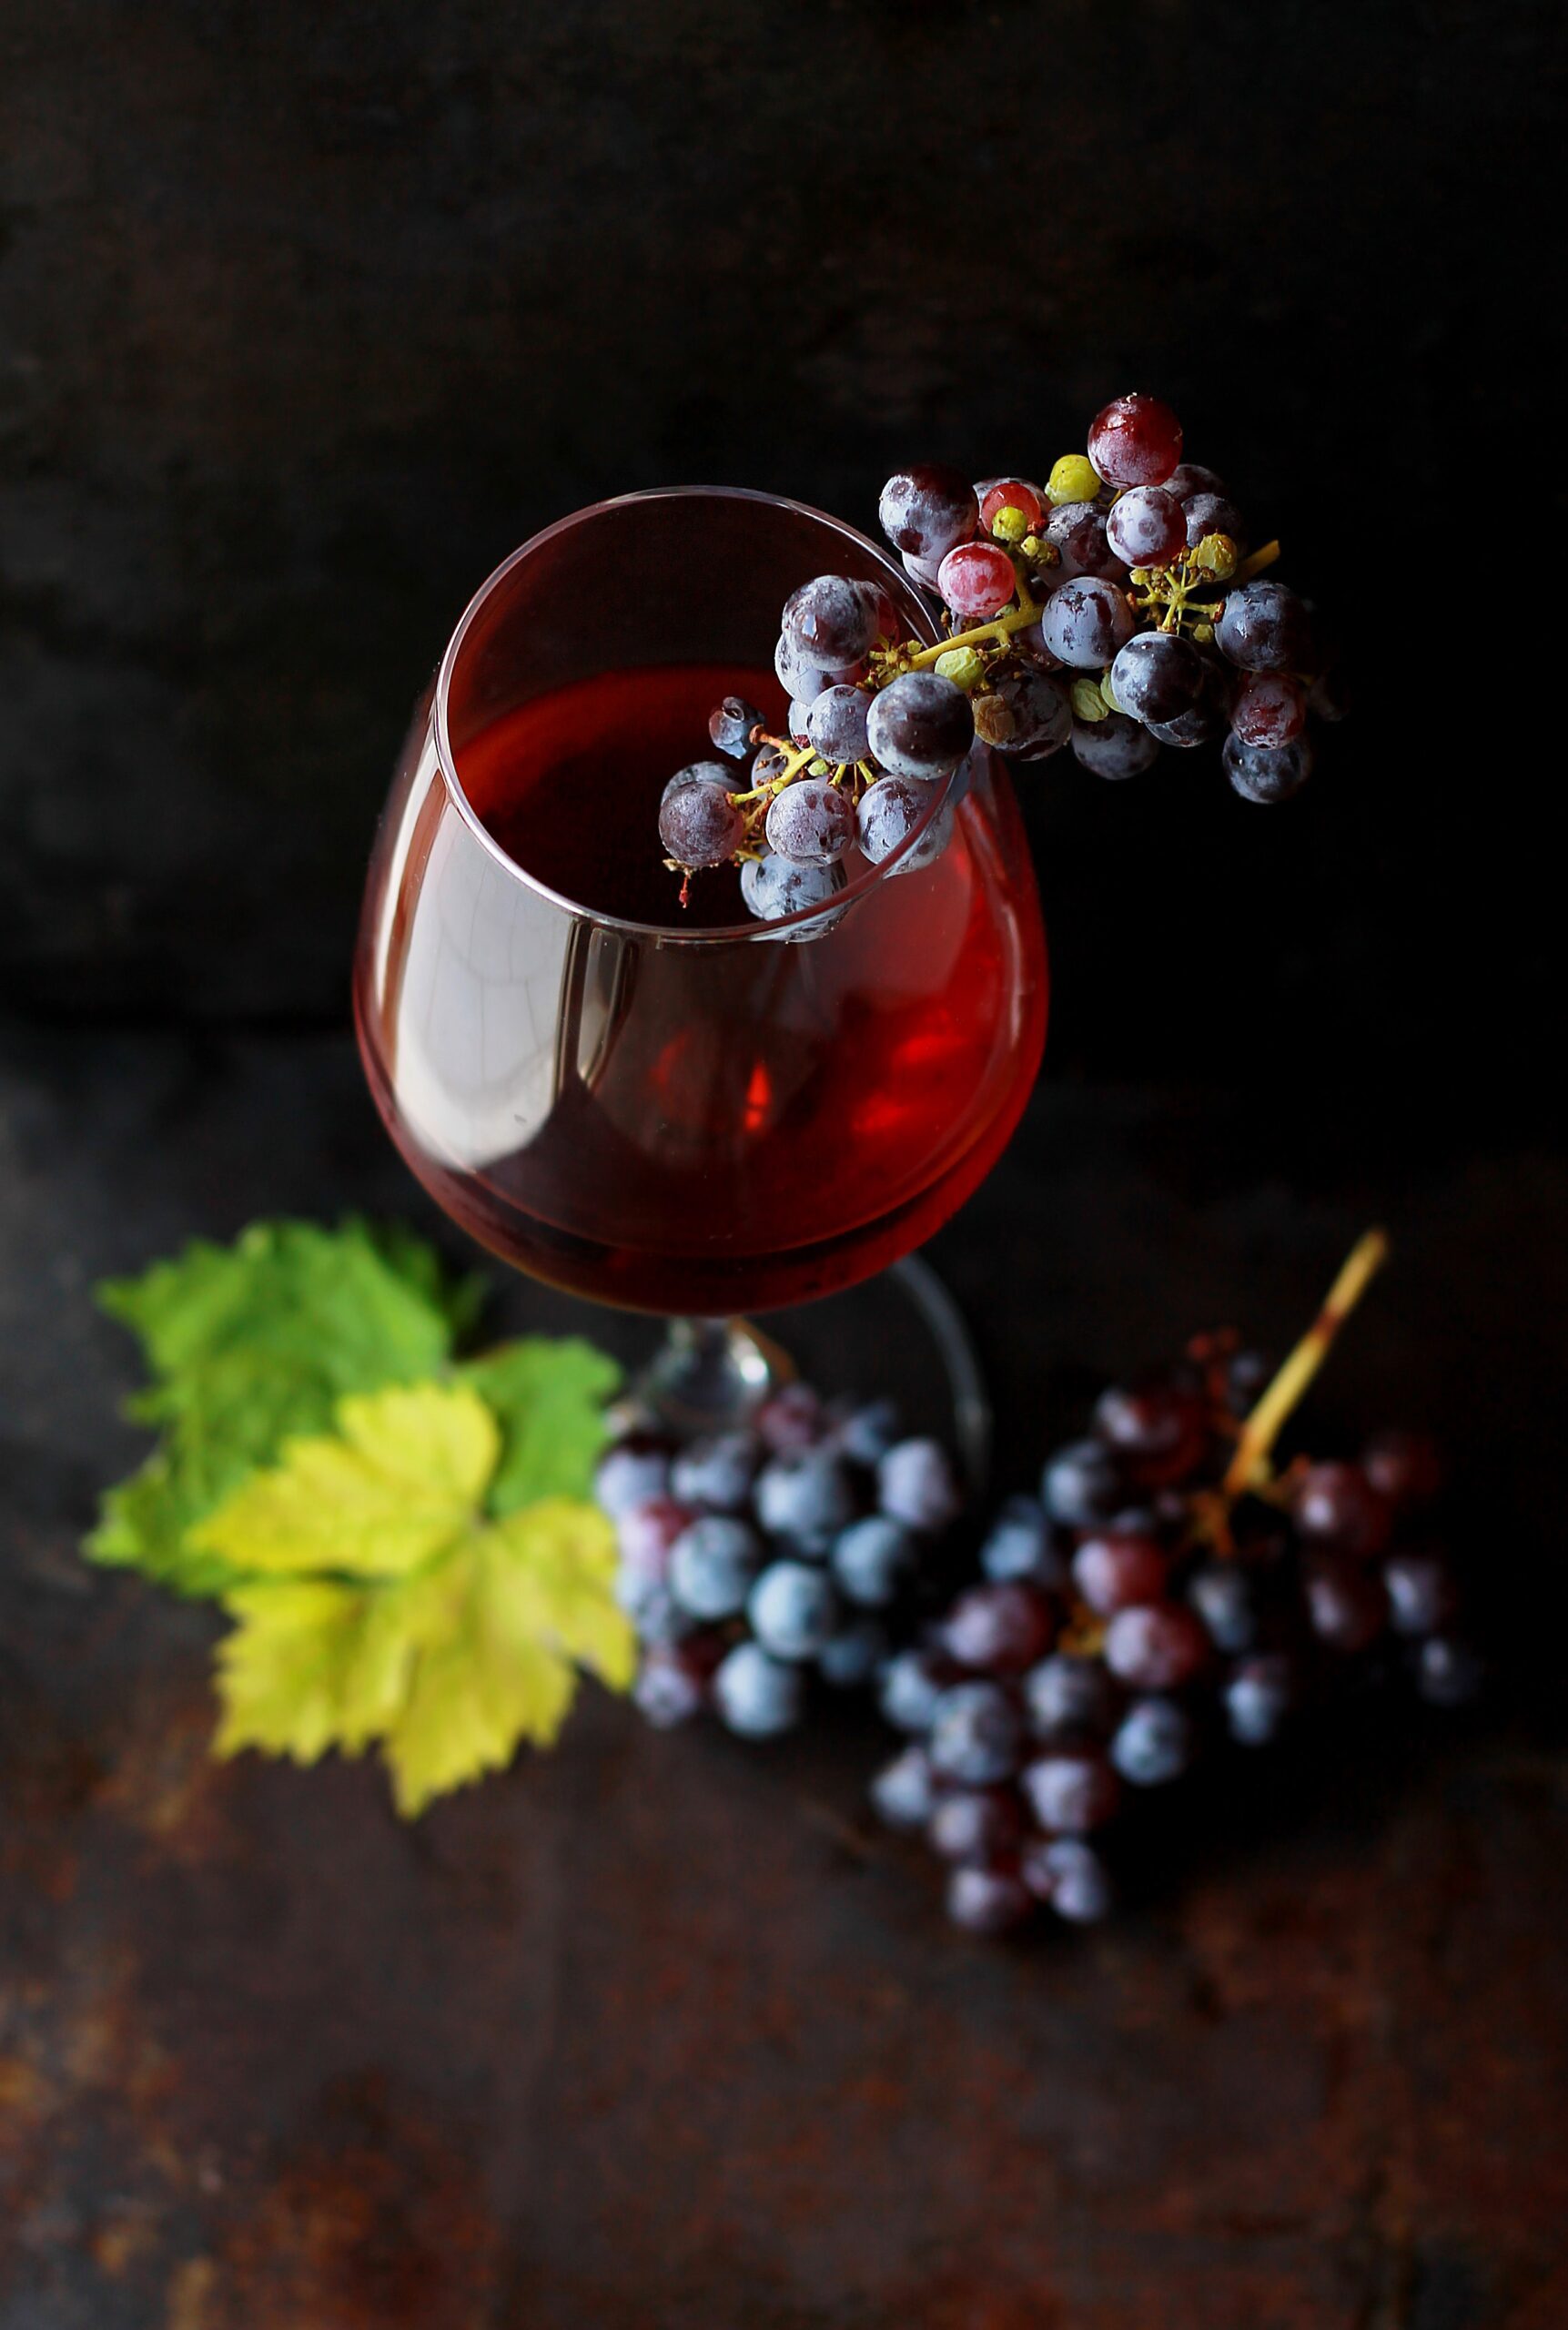 Depicts a glass of wine near grapes and grape leaves. Used as a photo to represent wine as an alternative asset class.